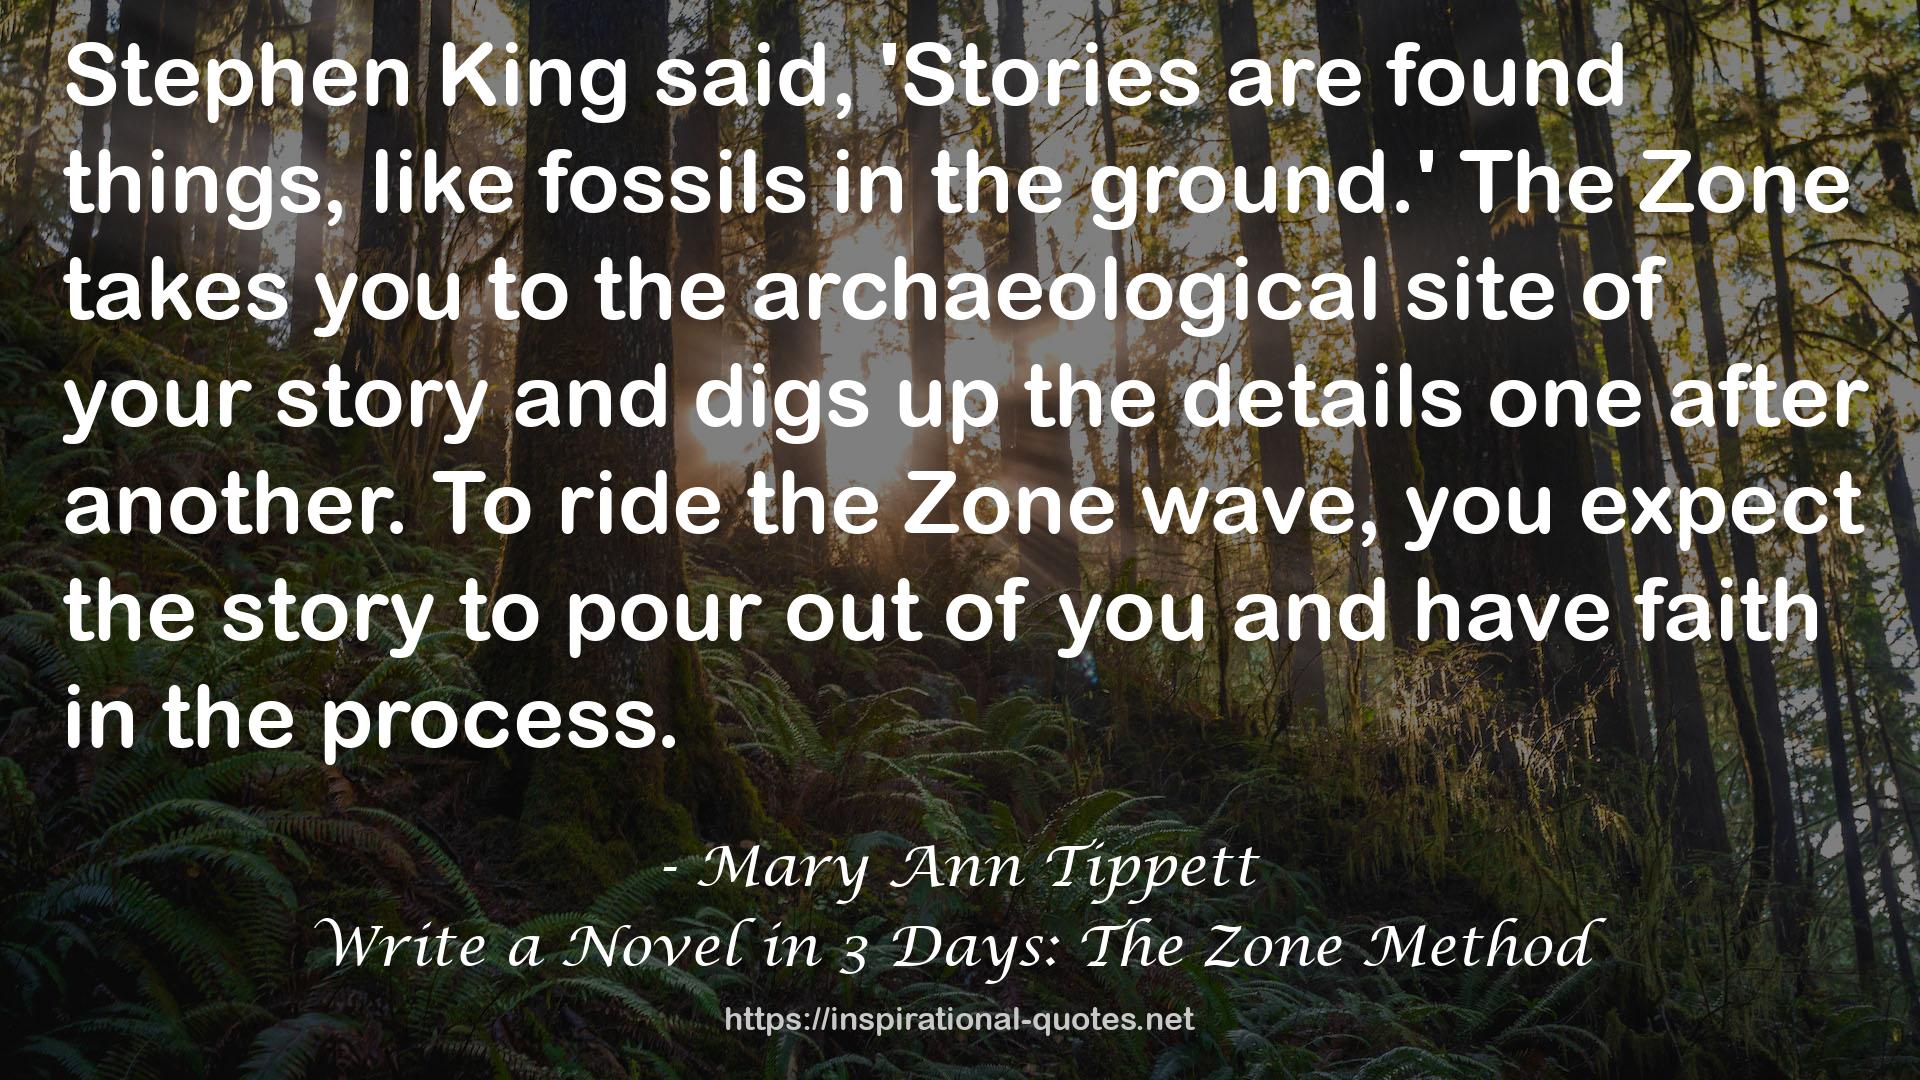 Write a Novel in 3 Days: The Zone Method QUOTES